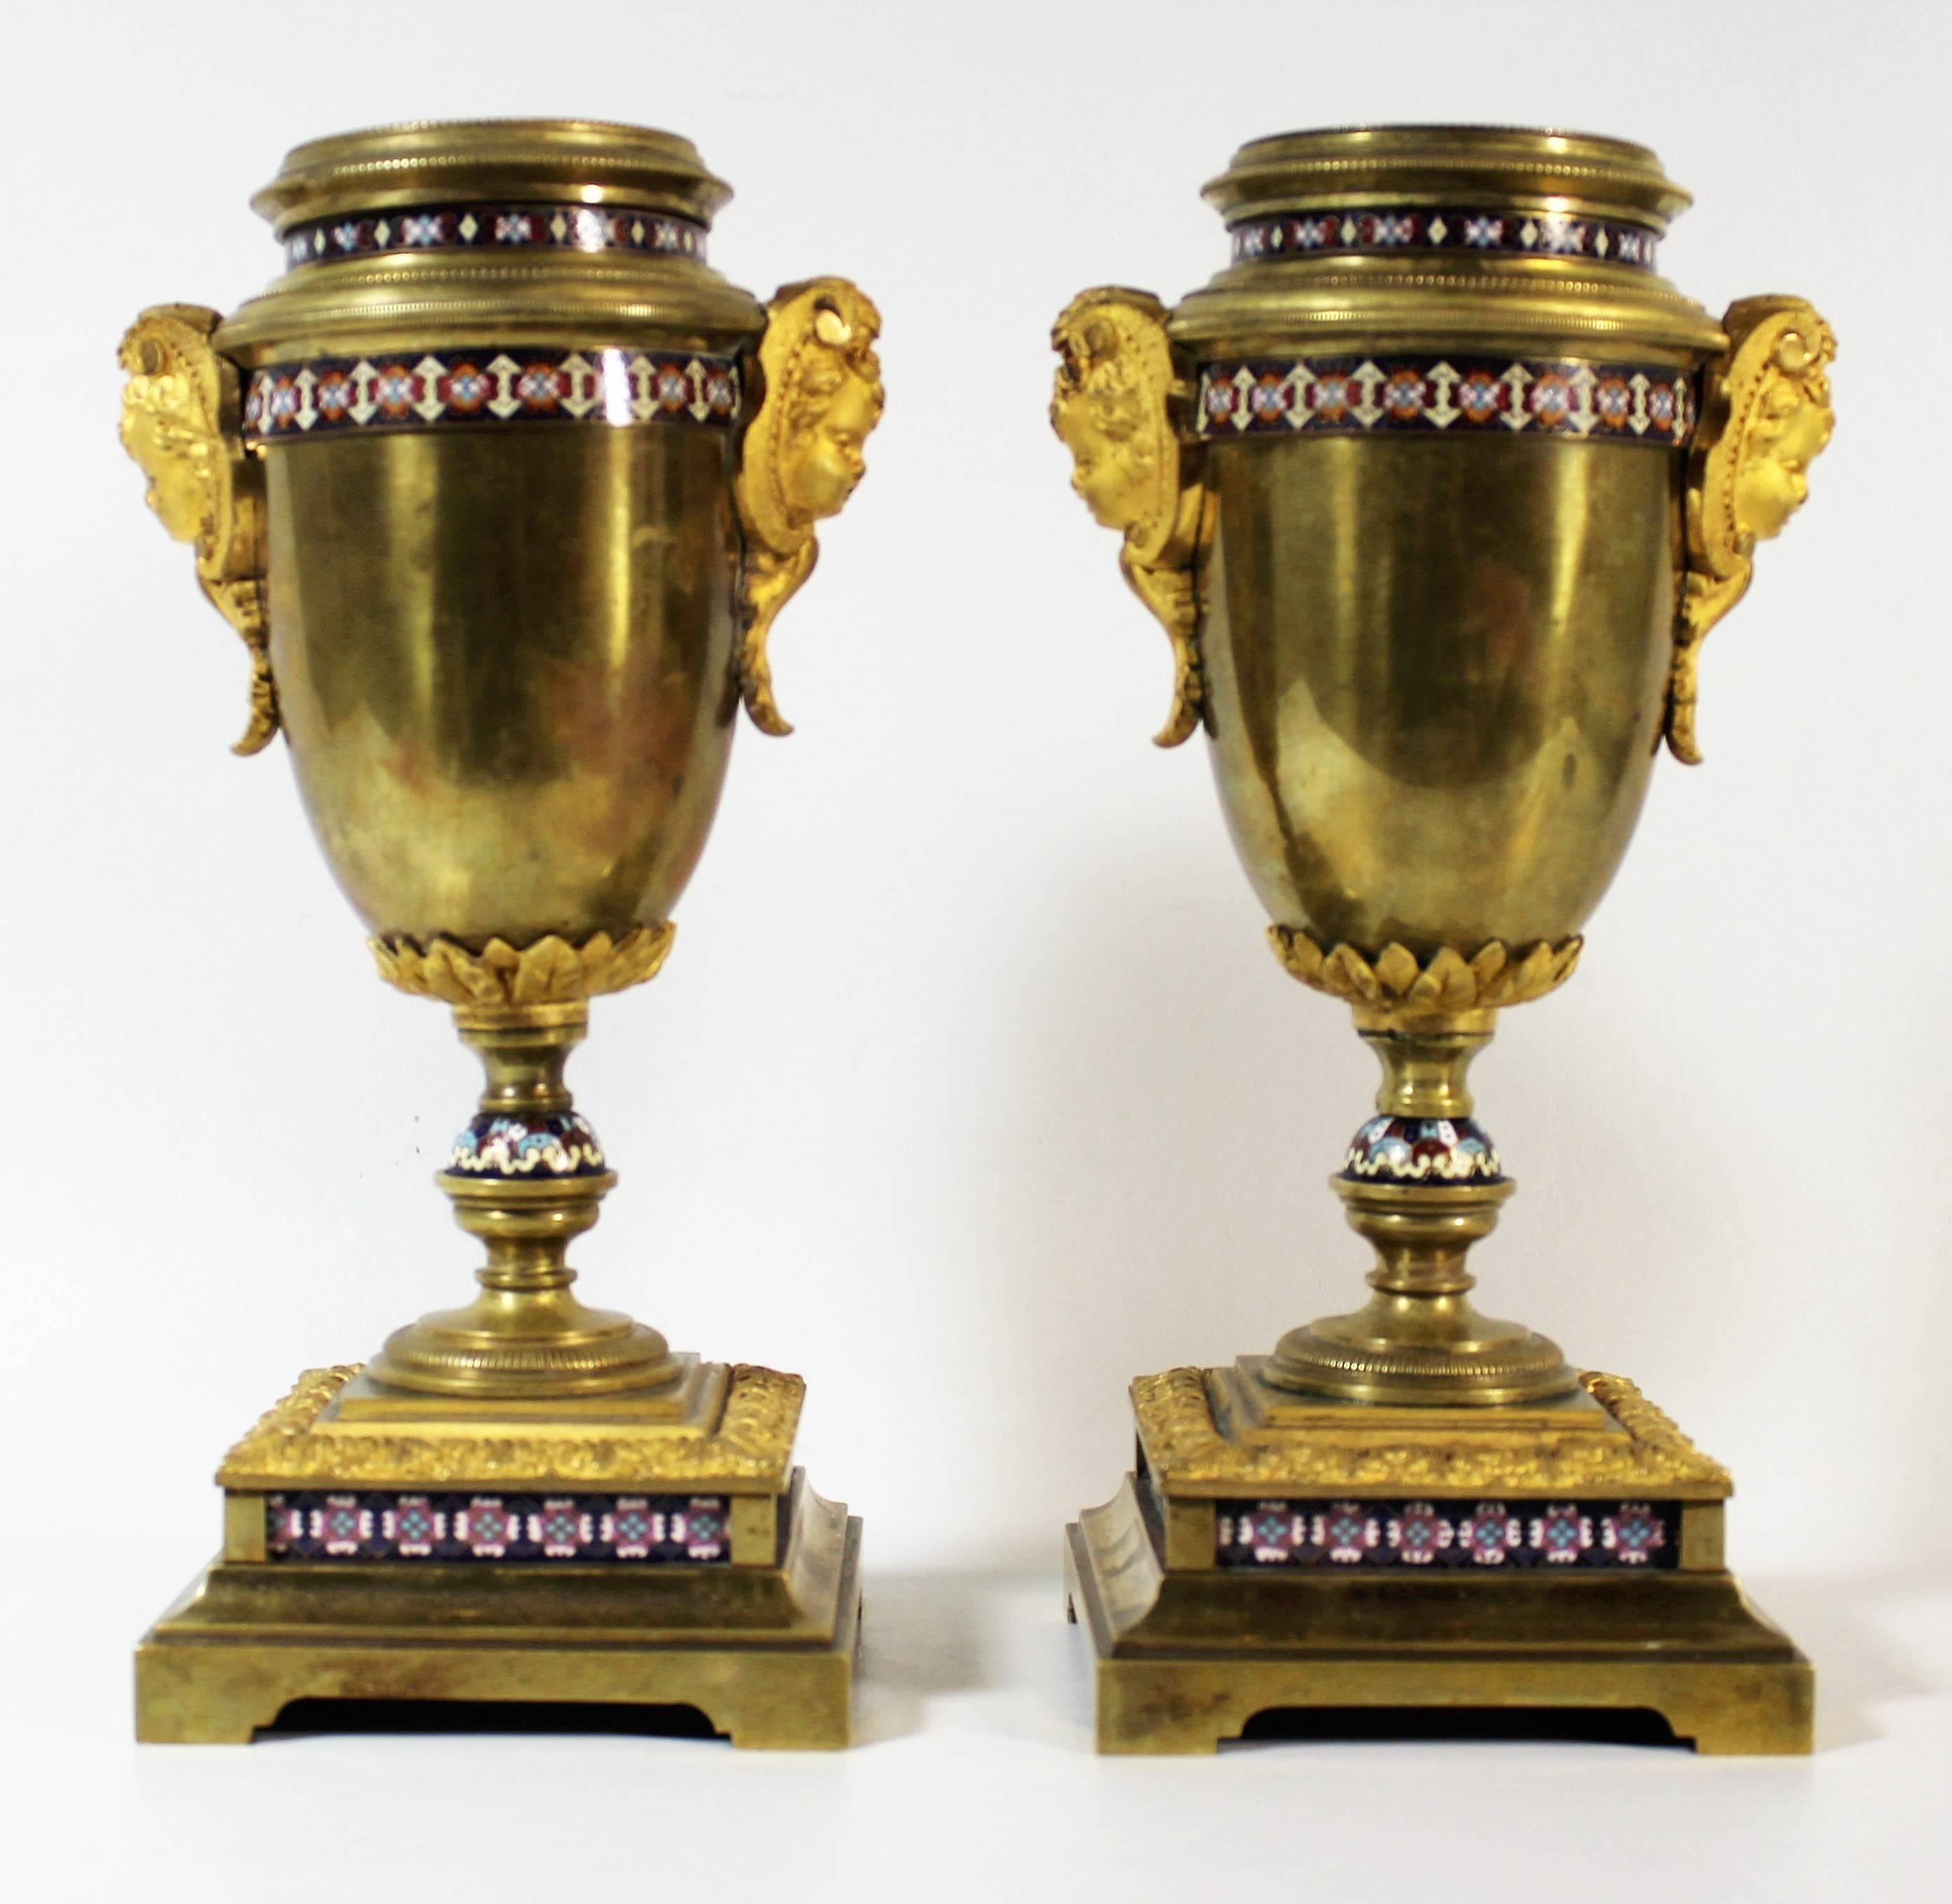  Pair of 19th Century French Gilt Bronze and Champleve Enamel Urns For Sale 2